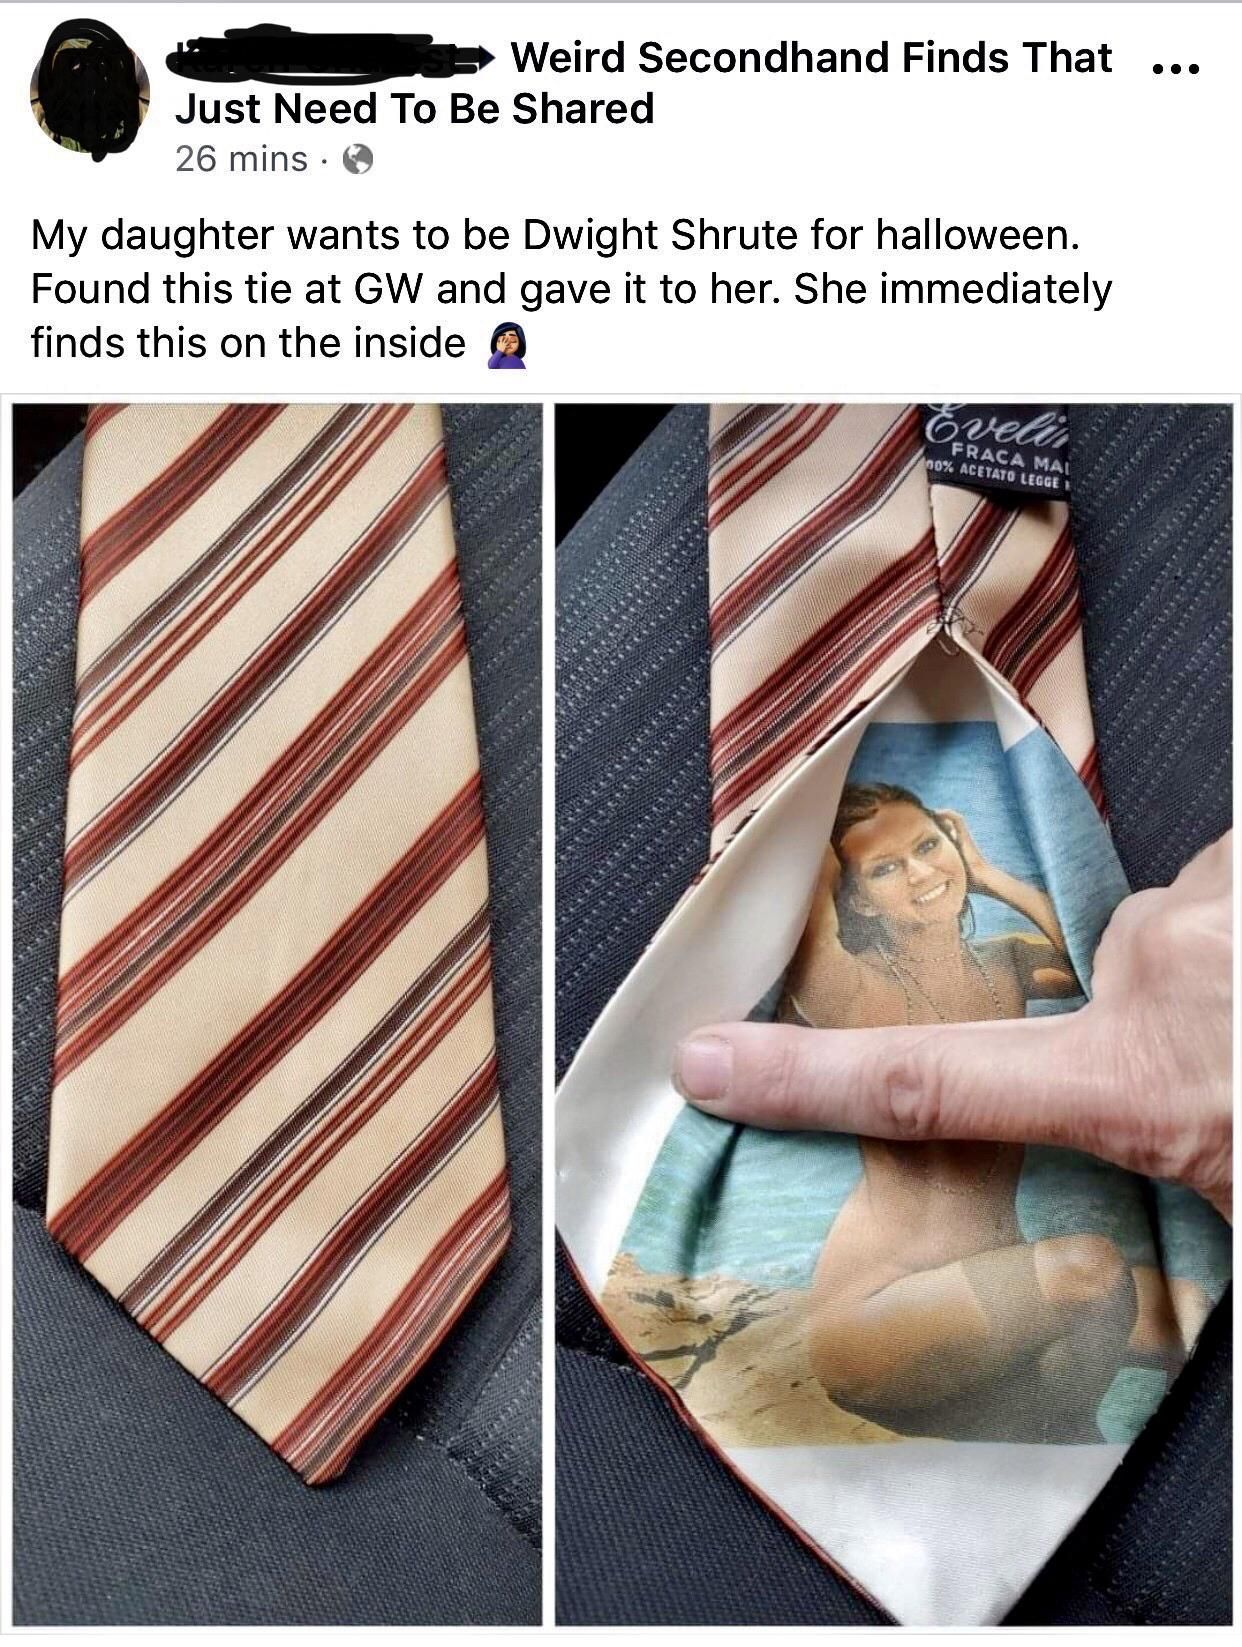 Whose to say Dwight didn’t use the same tie?